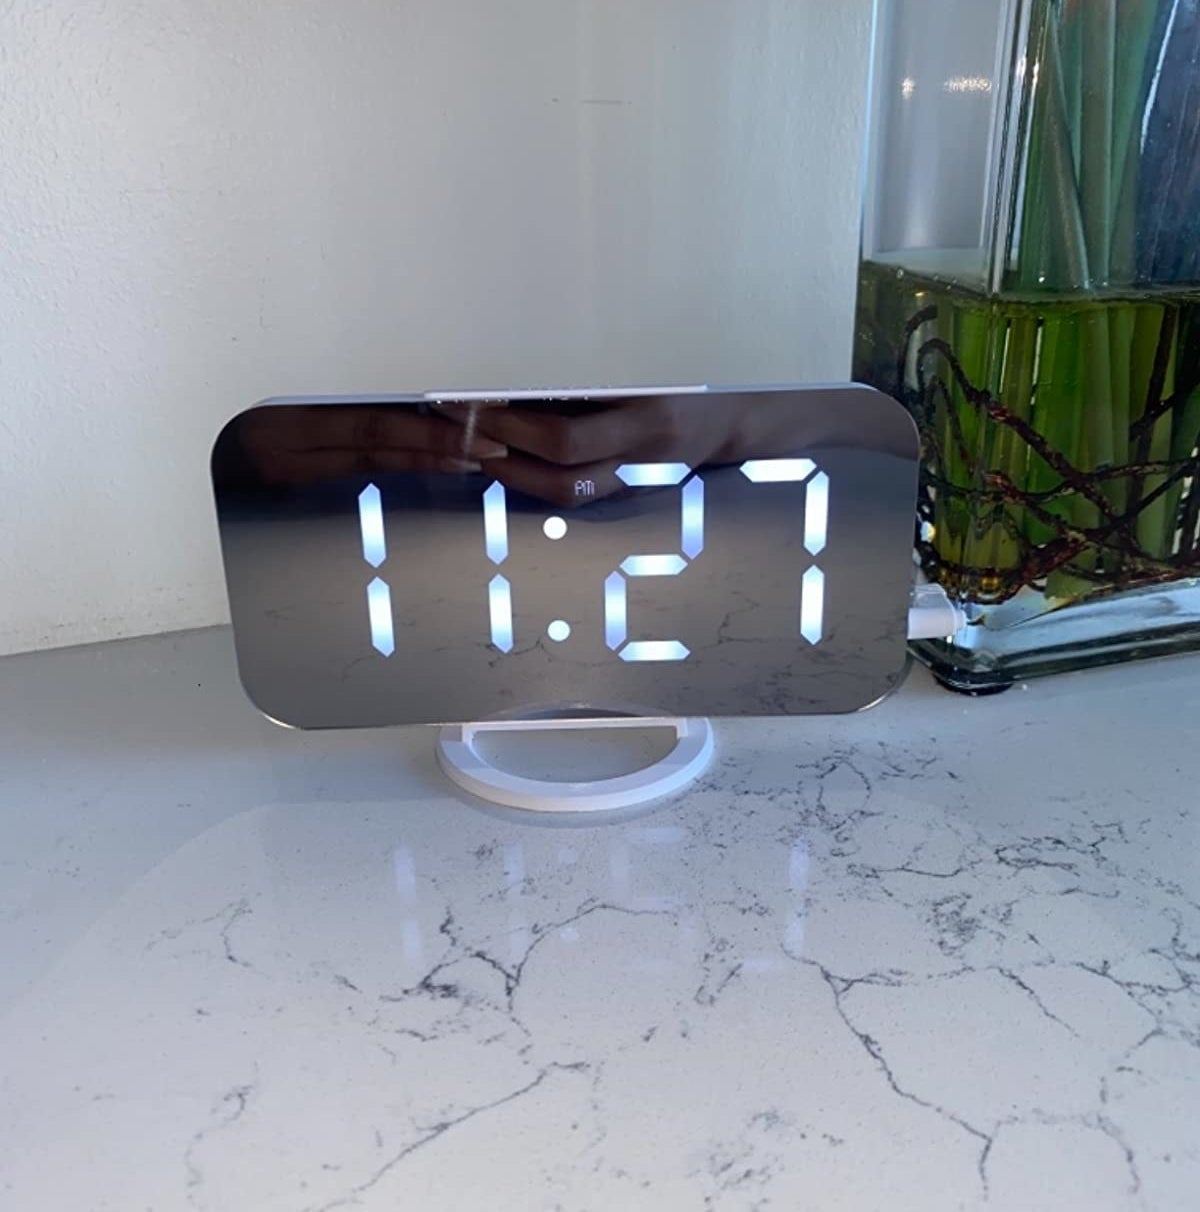 mirrored alarm clock on a marbled surface